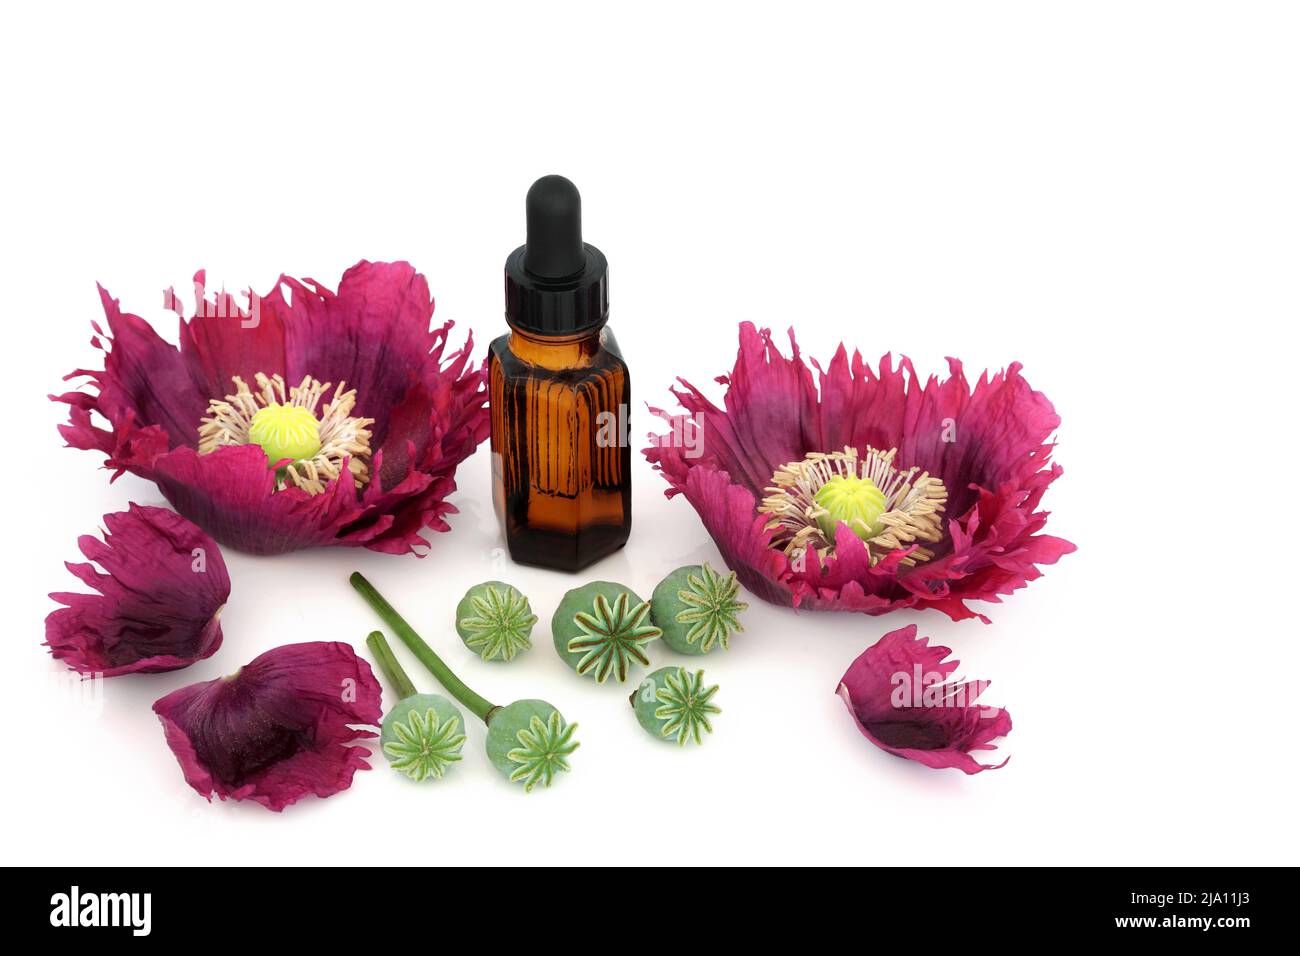 Poppy flowers and seed heads with tincture bottle. Seeds used in alternative medicine to treat constipation, asthma, coughs, insomnia. Stock Photo